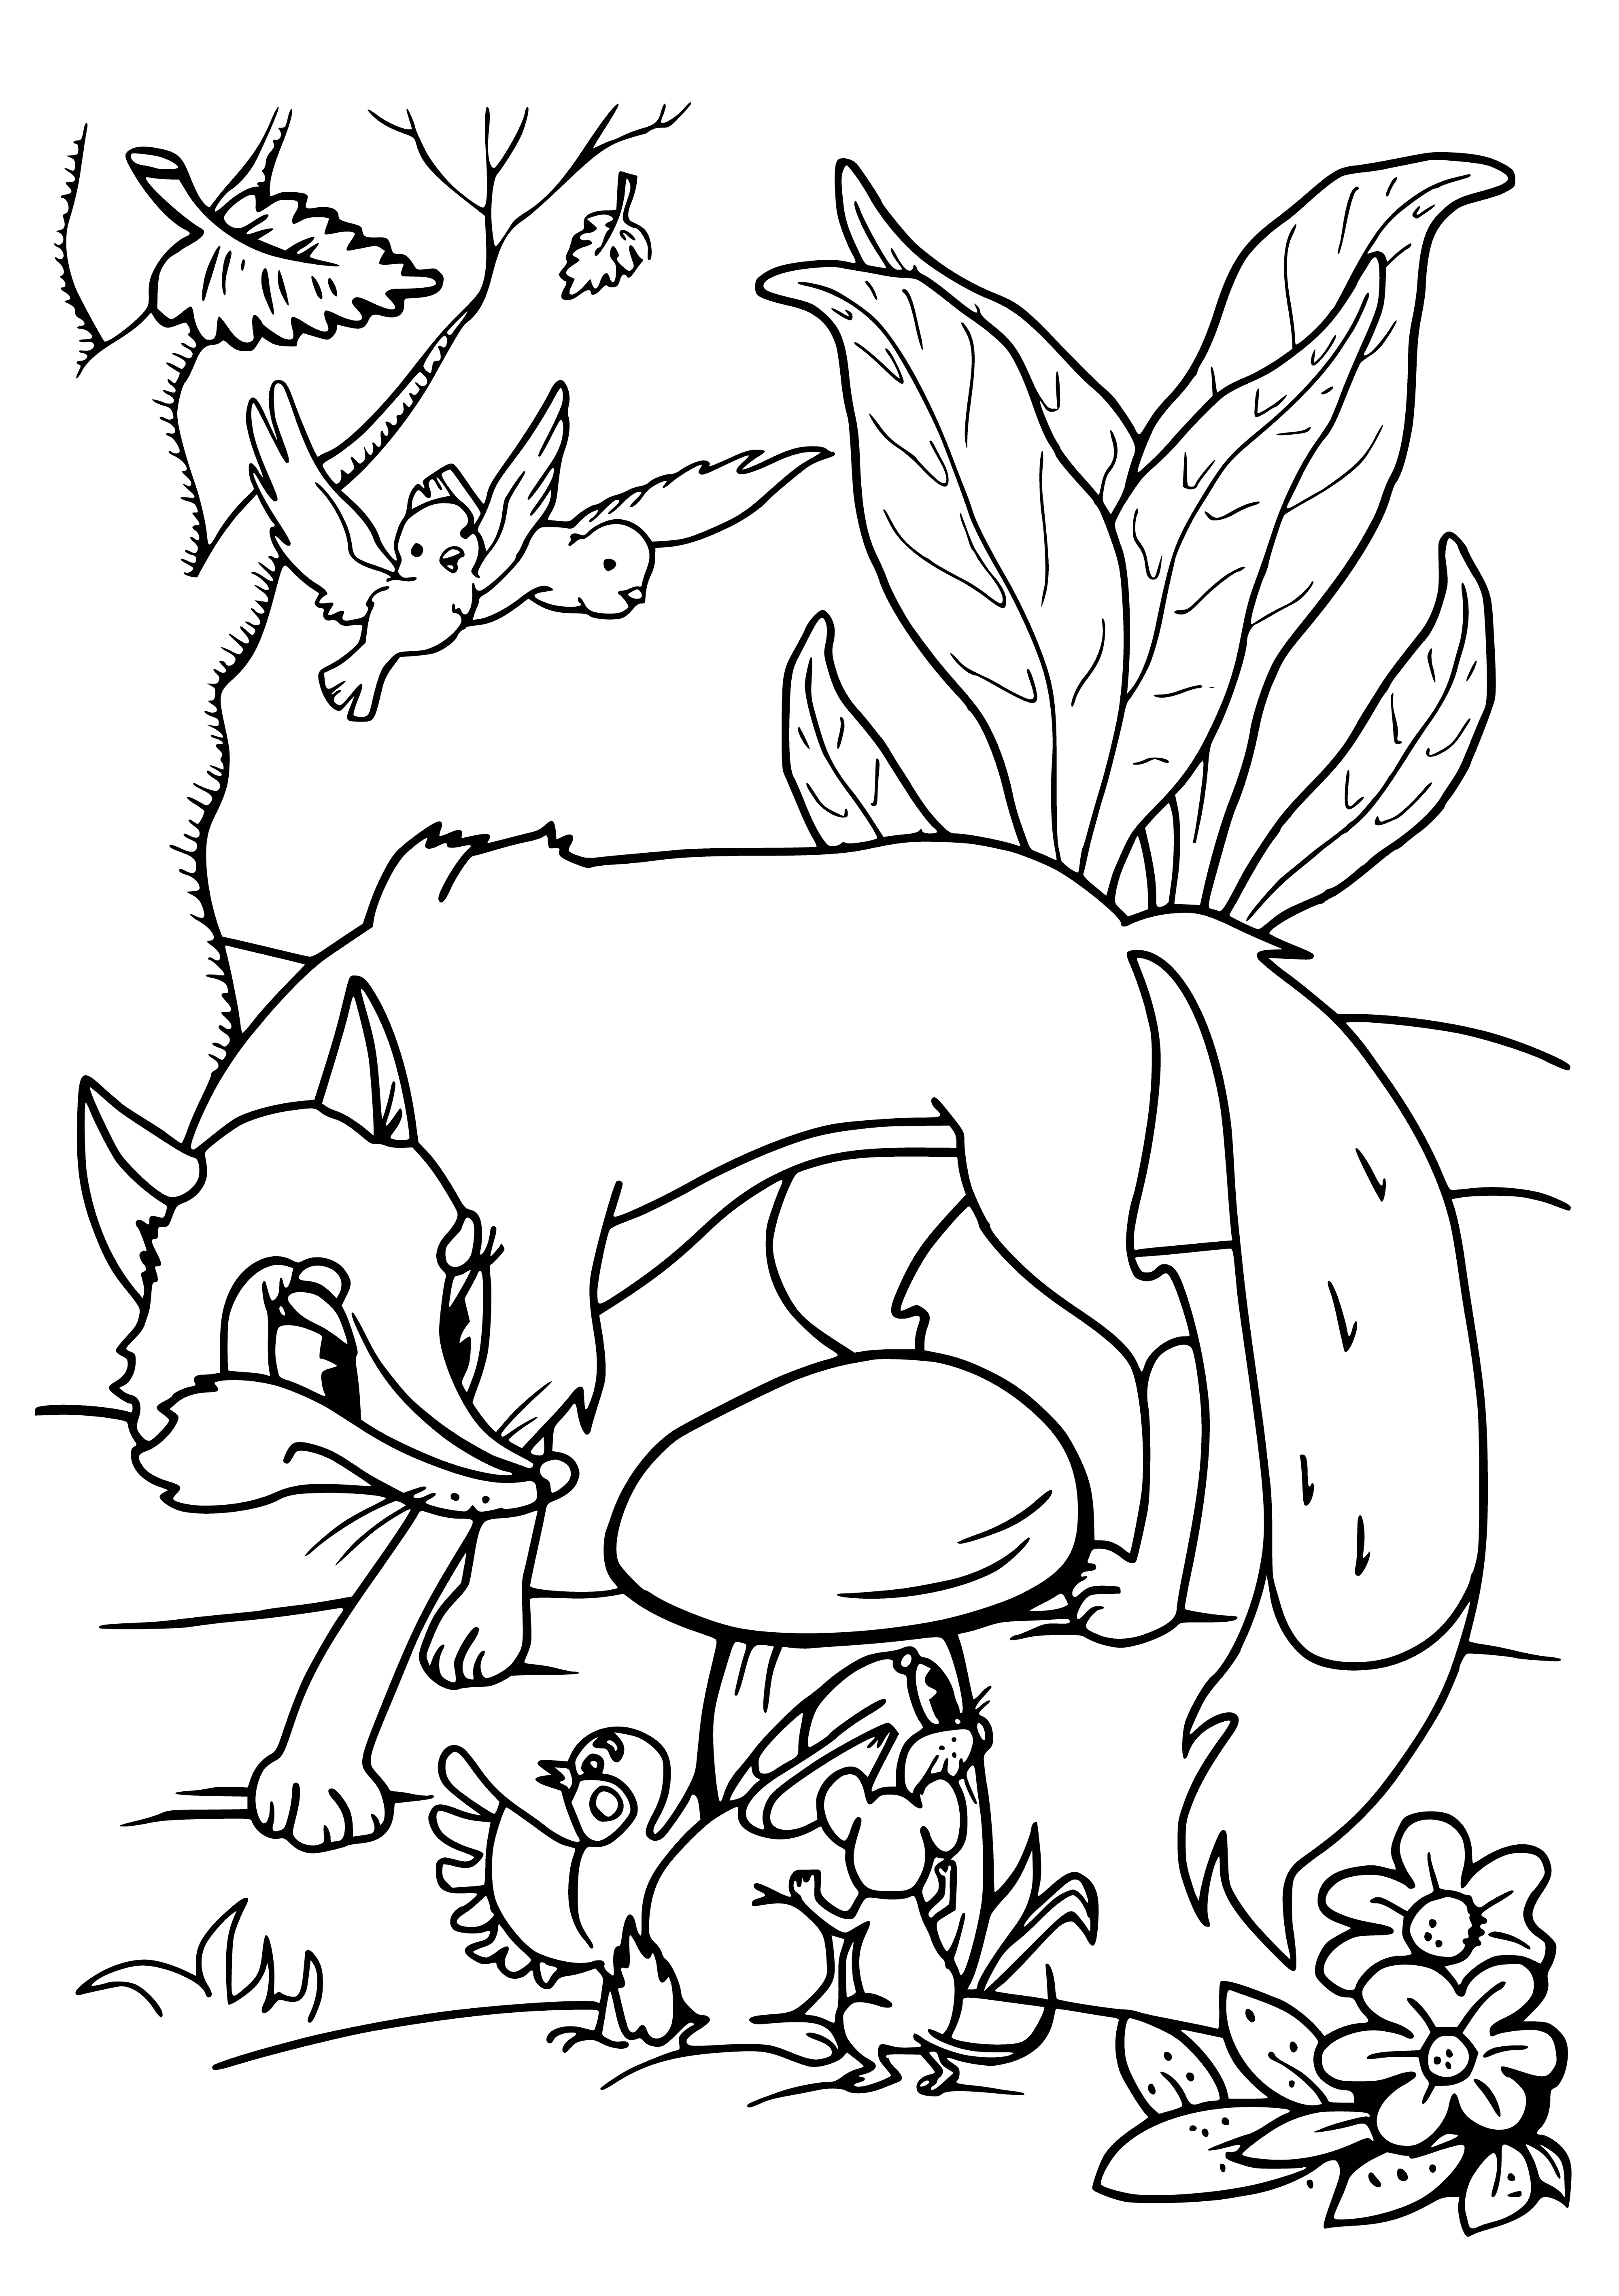 coloring page: Girl talks to big mushroom in dark forest; sadness on her face.